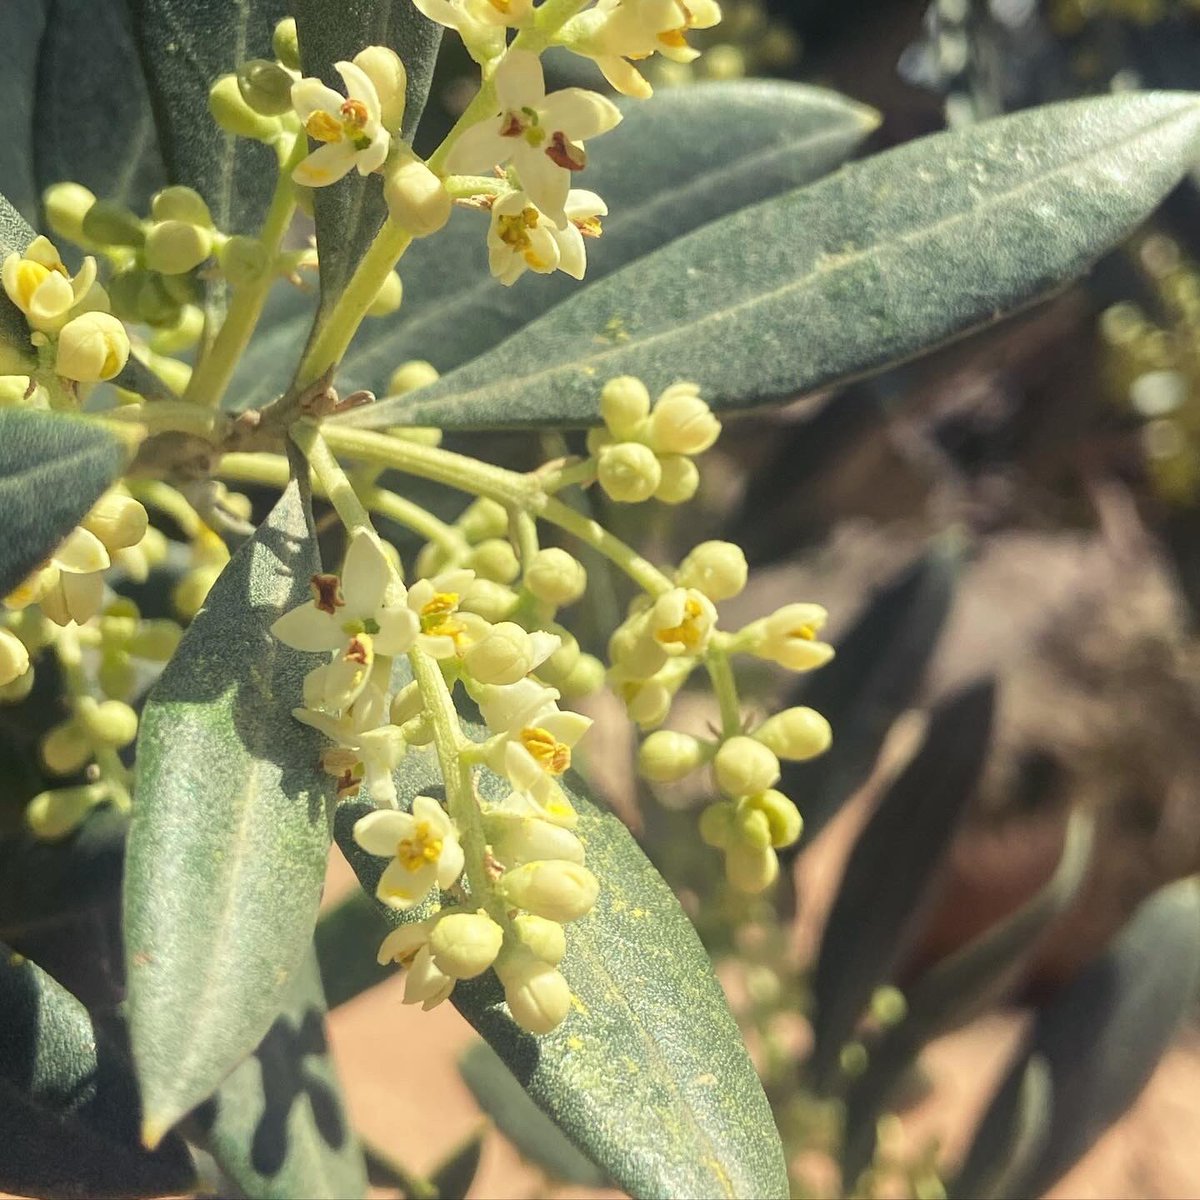 Blooming, blooming … Hope the wheather help us for having a good harvest. 🤞🏻🫒🫒🫒🫒🤞🏻 #oliveblooming #organicolives #springtime #goodweather #rainfalls #softtemperatures #harvest